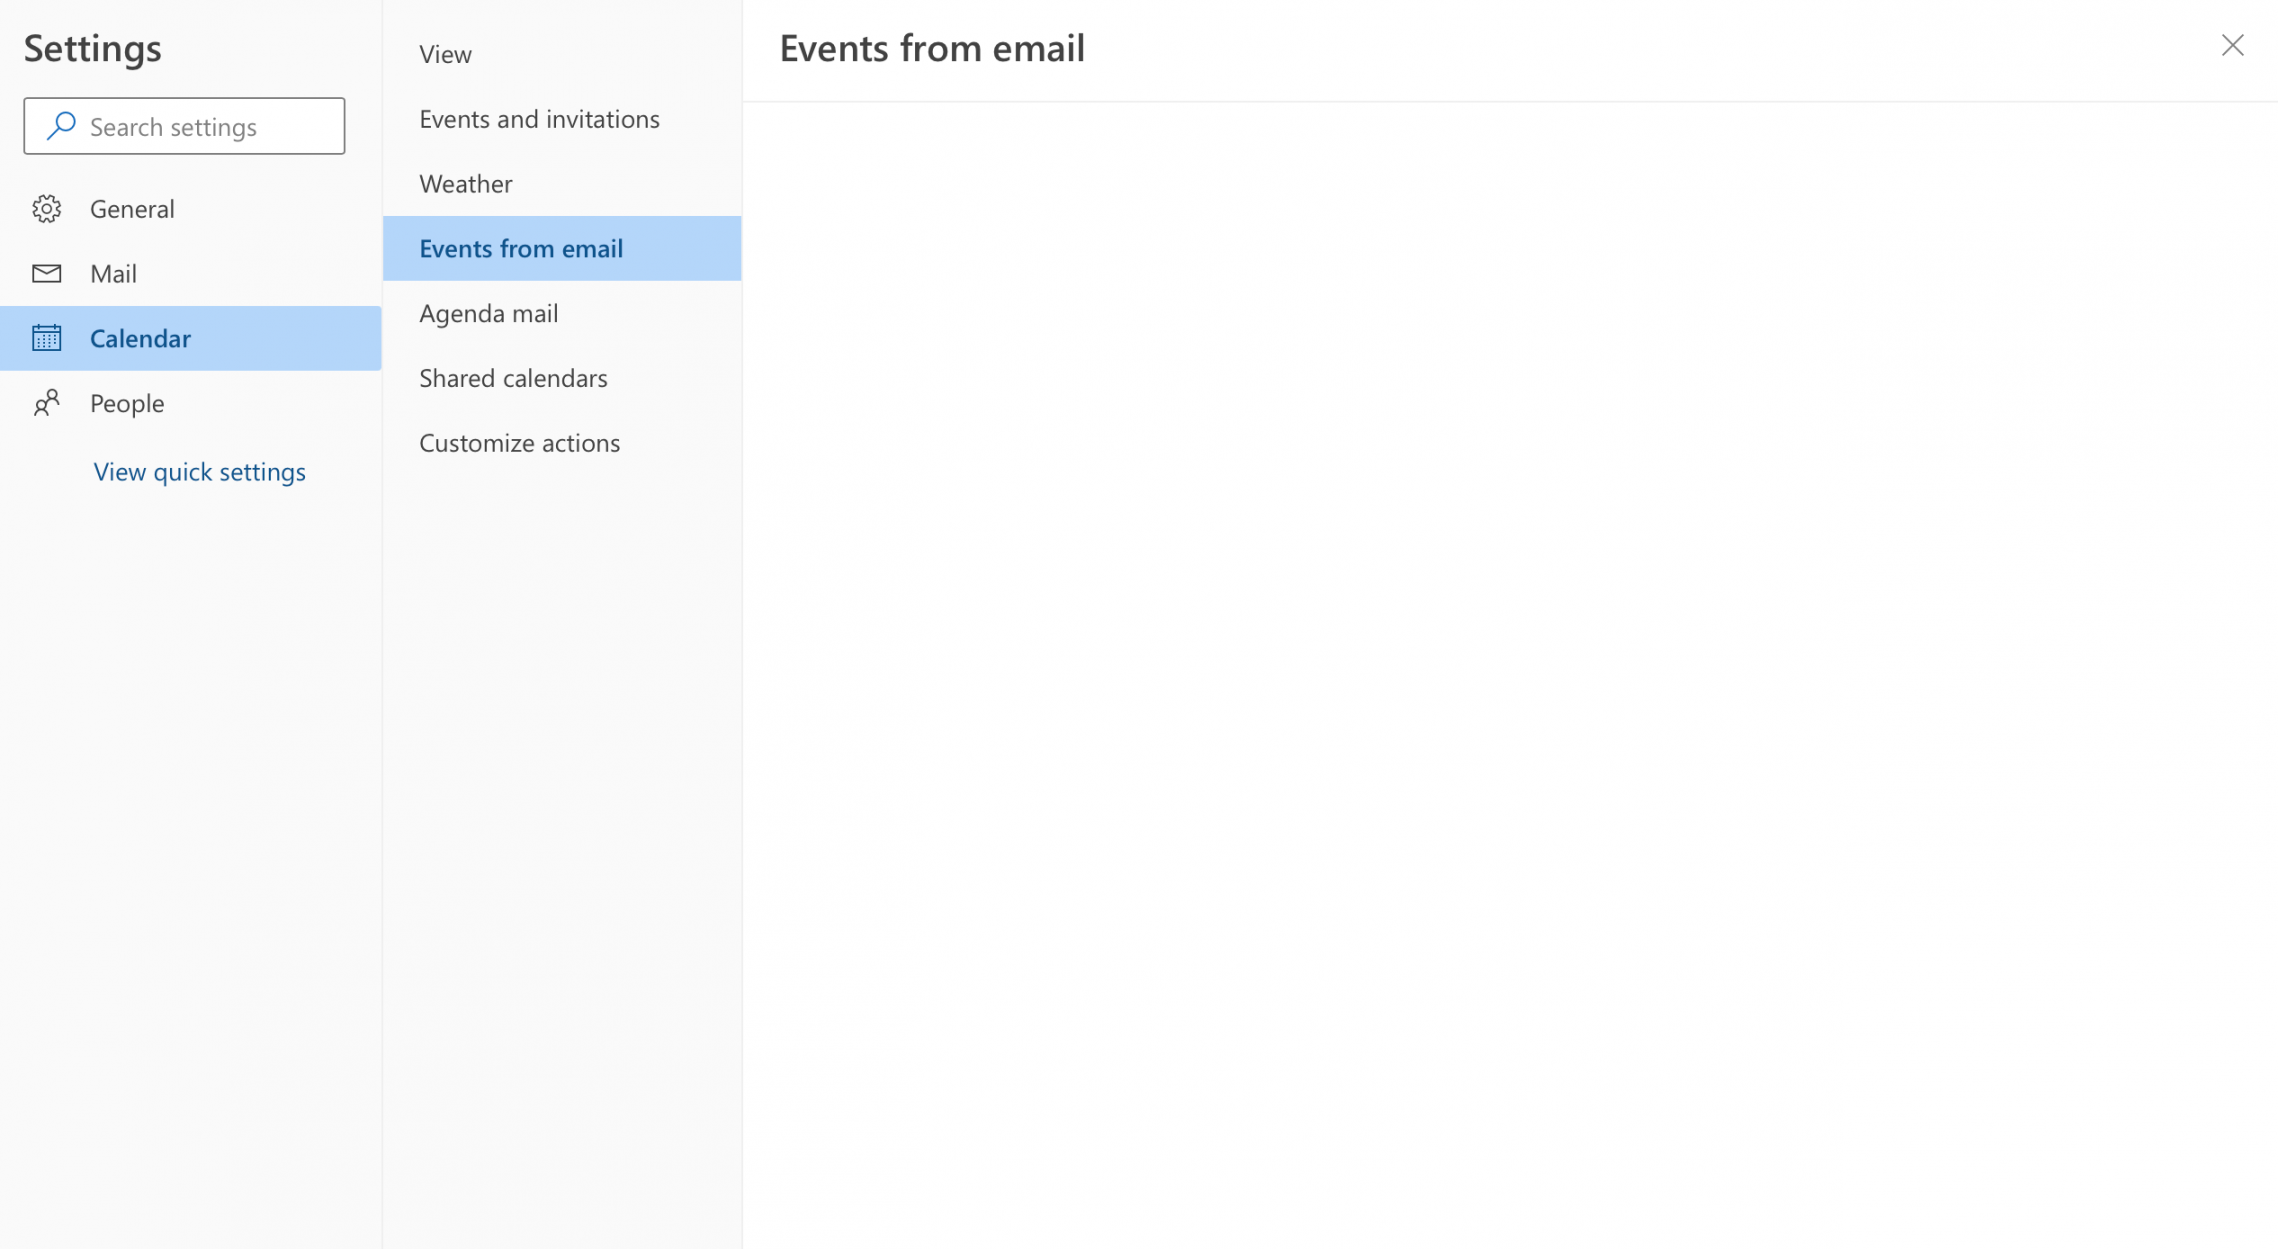 My "events from email" calendar setting is blank and I want to